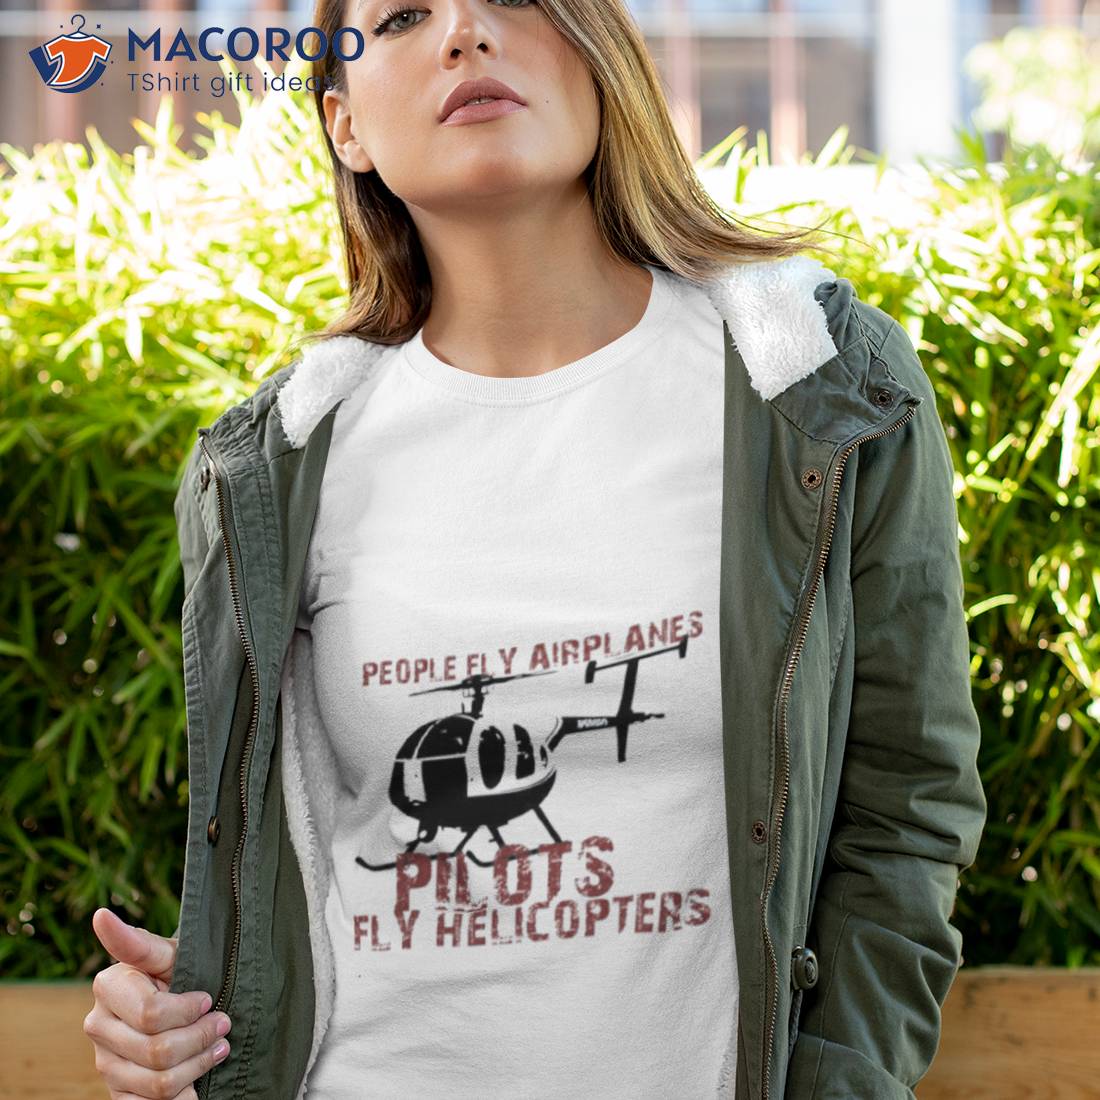 Pilots Flying Helicopters Shirt